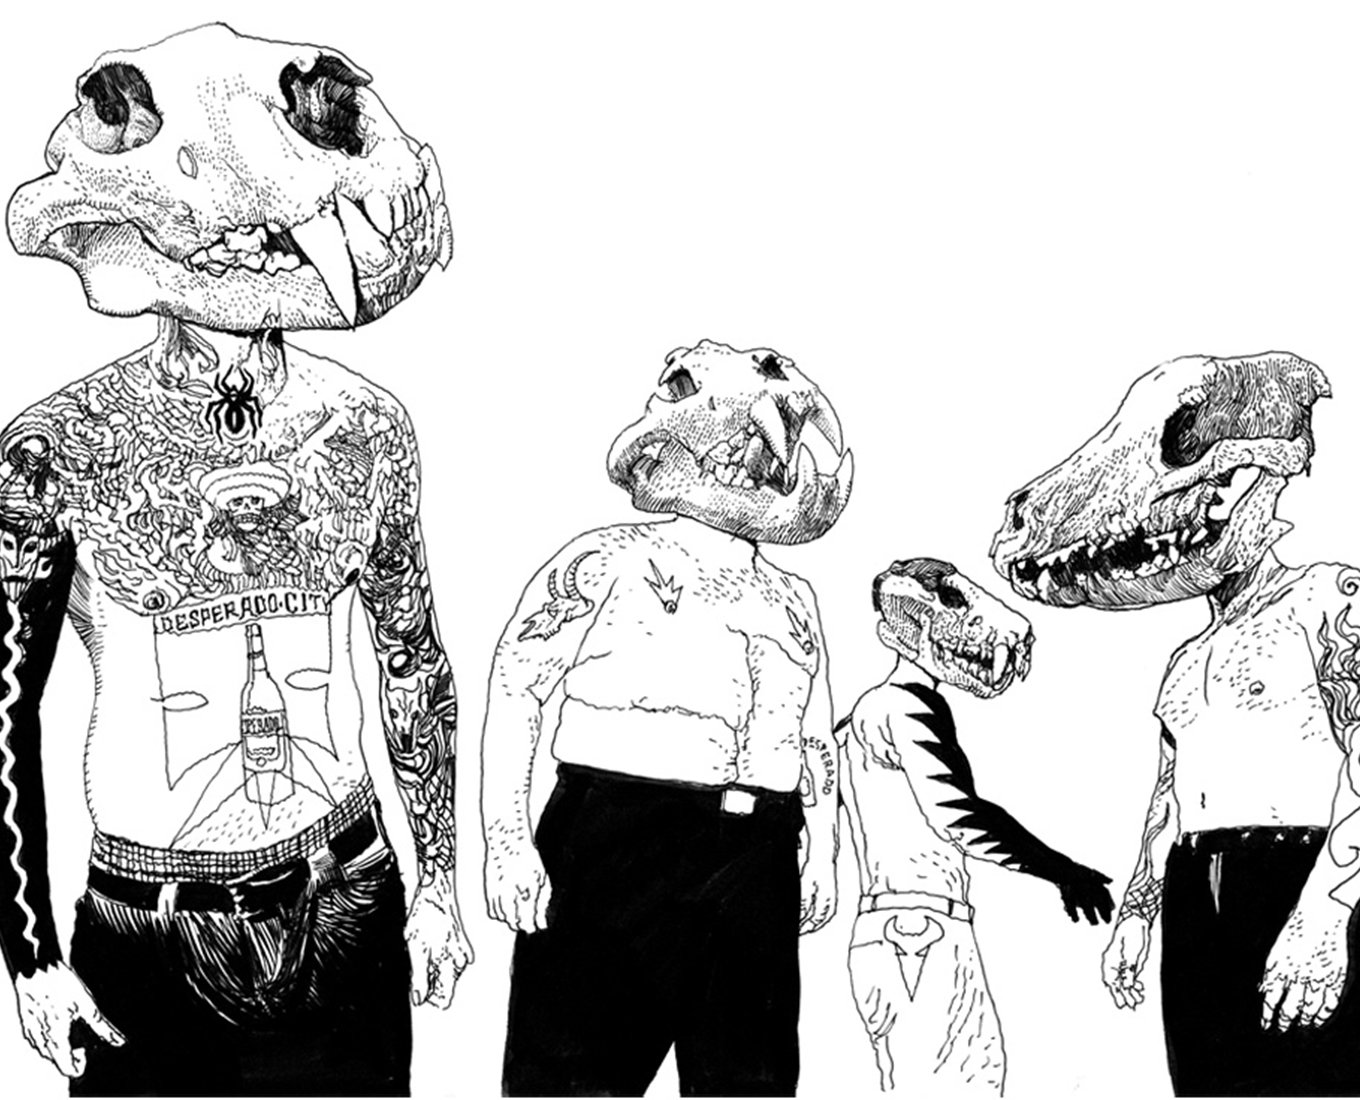 A drawing of four tattooed, topless people with animal skulls as heads.